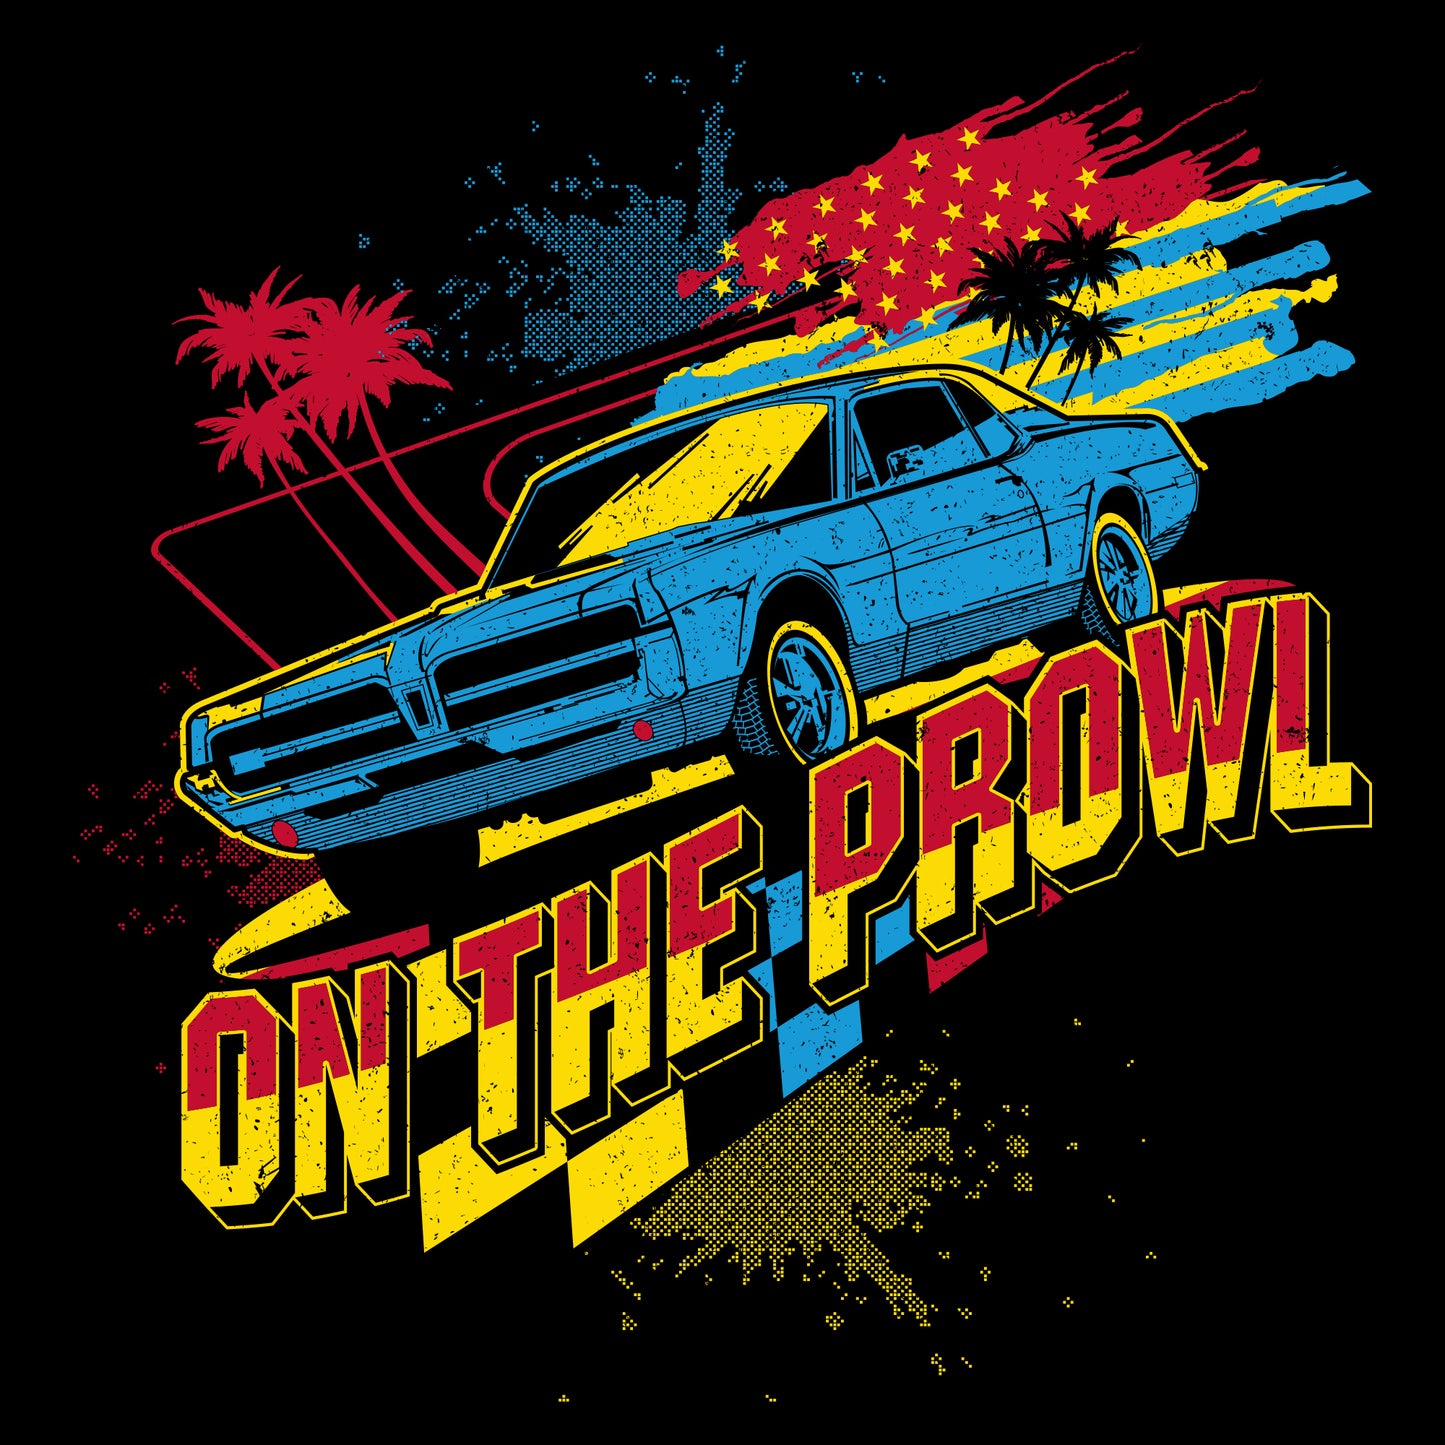 Car Shirts - Patriotic Clothing - On the Prowl Shirts for Men 